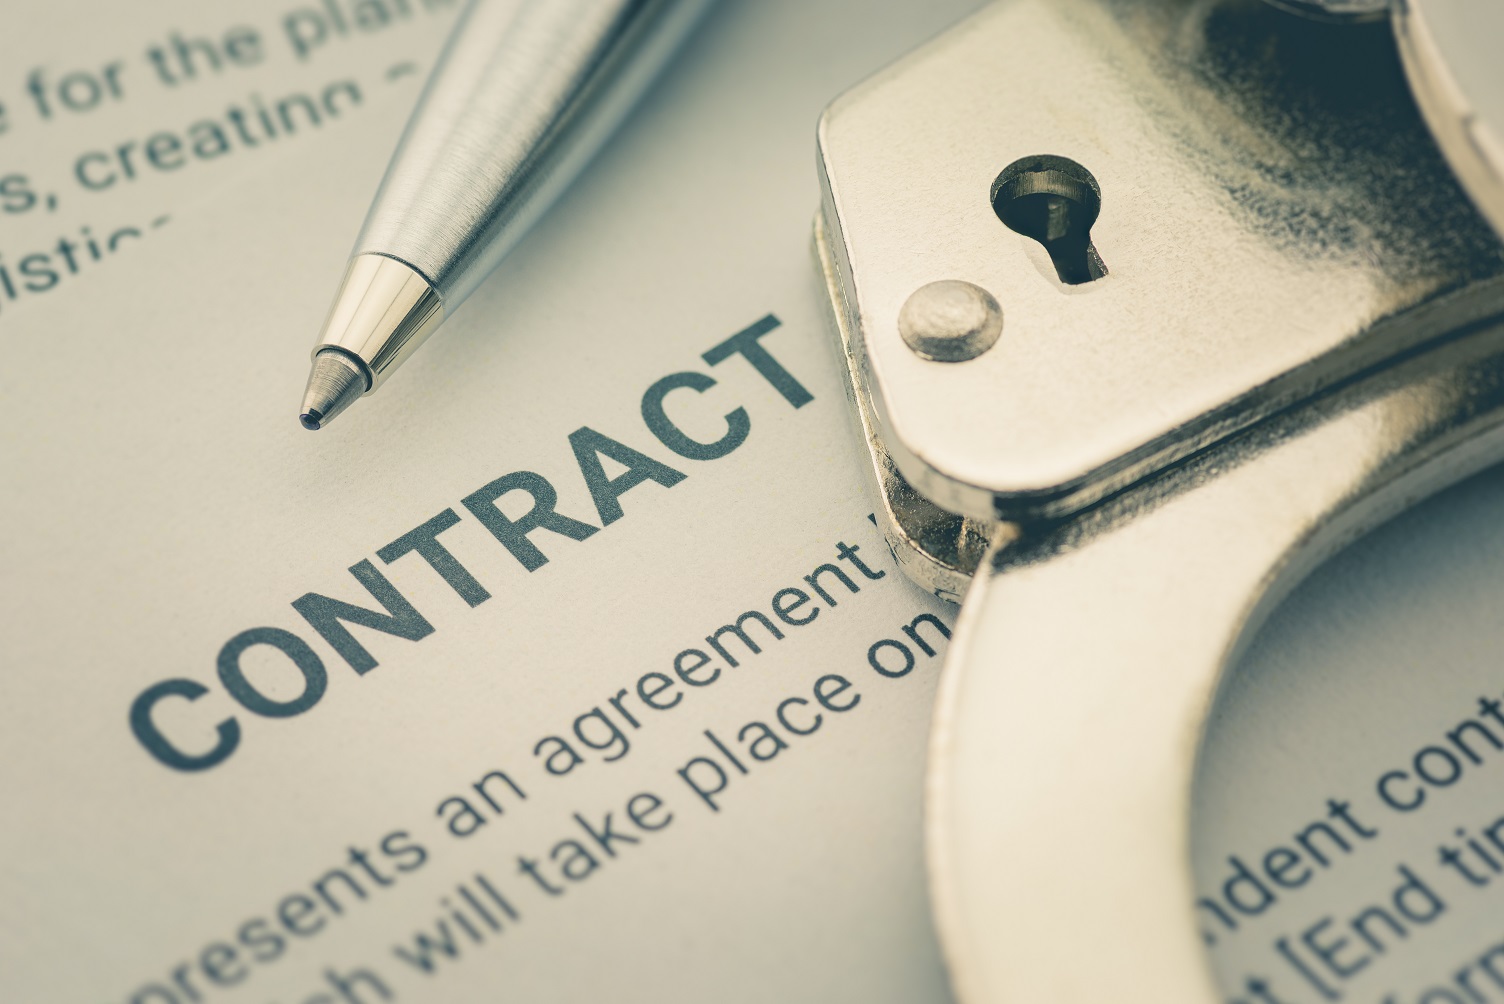 Changes to the Australian Consumer Law: Businesses Risk $50M Fines For Each Unfair Contract Term Within Their Standard Form Agreements